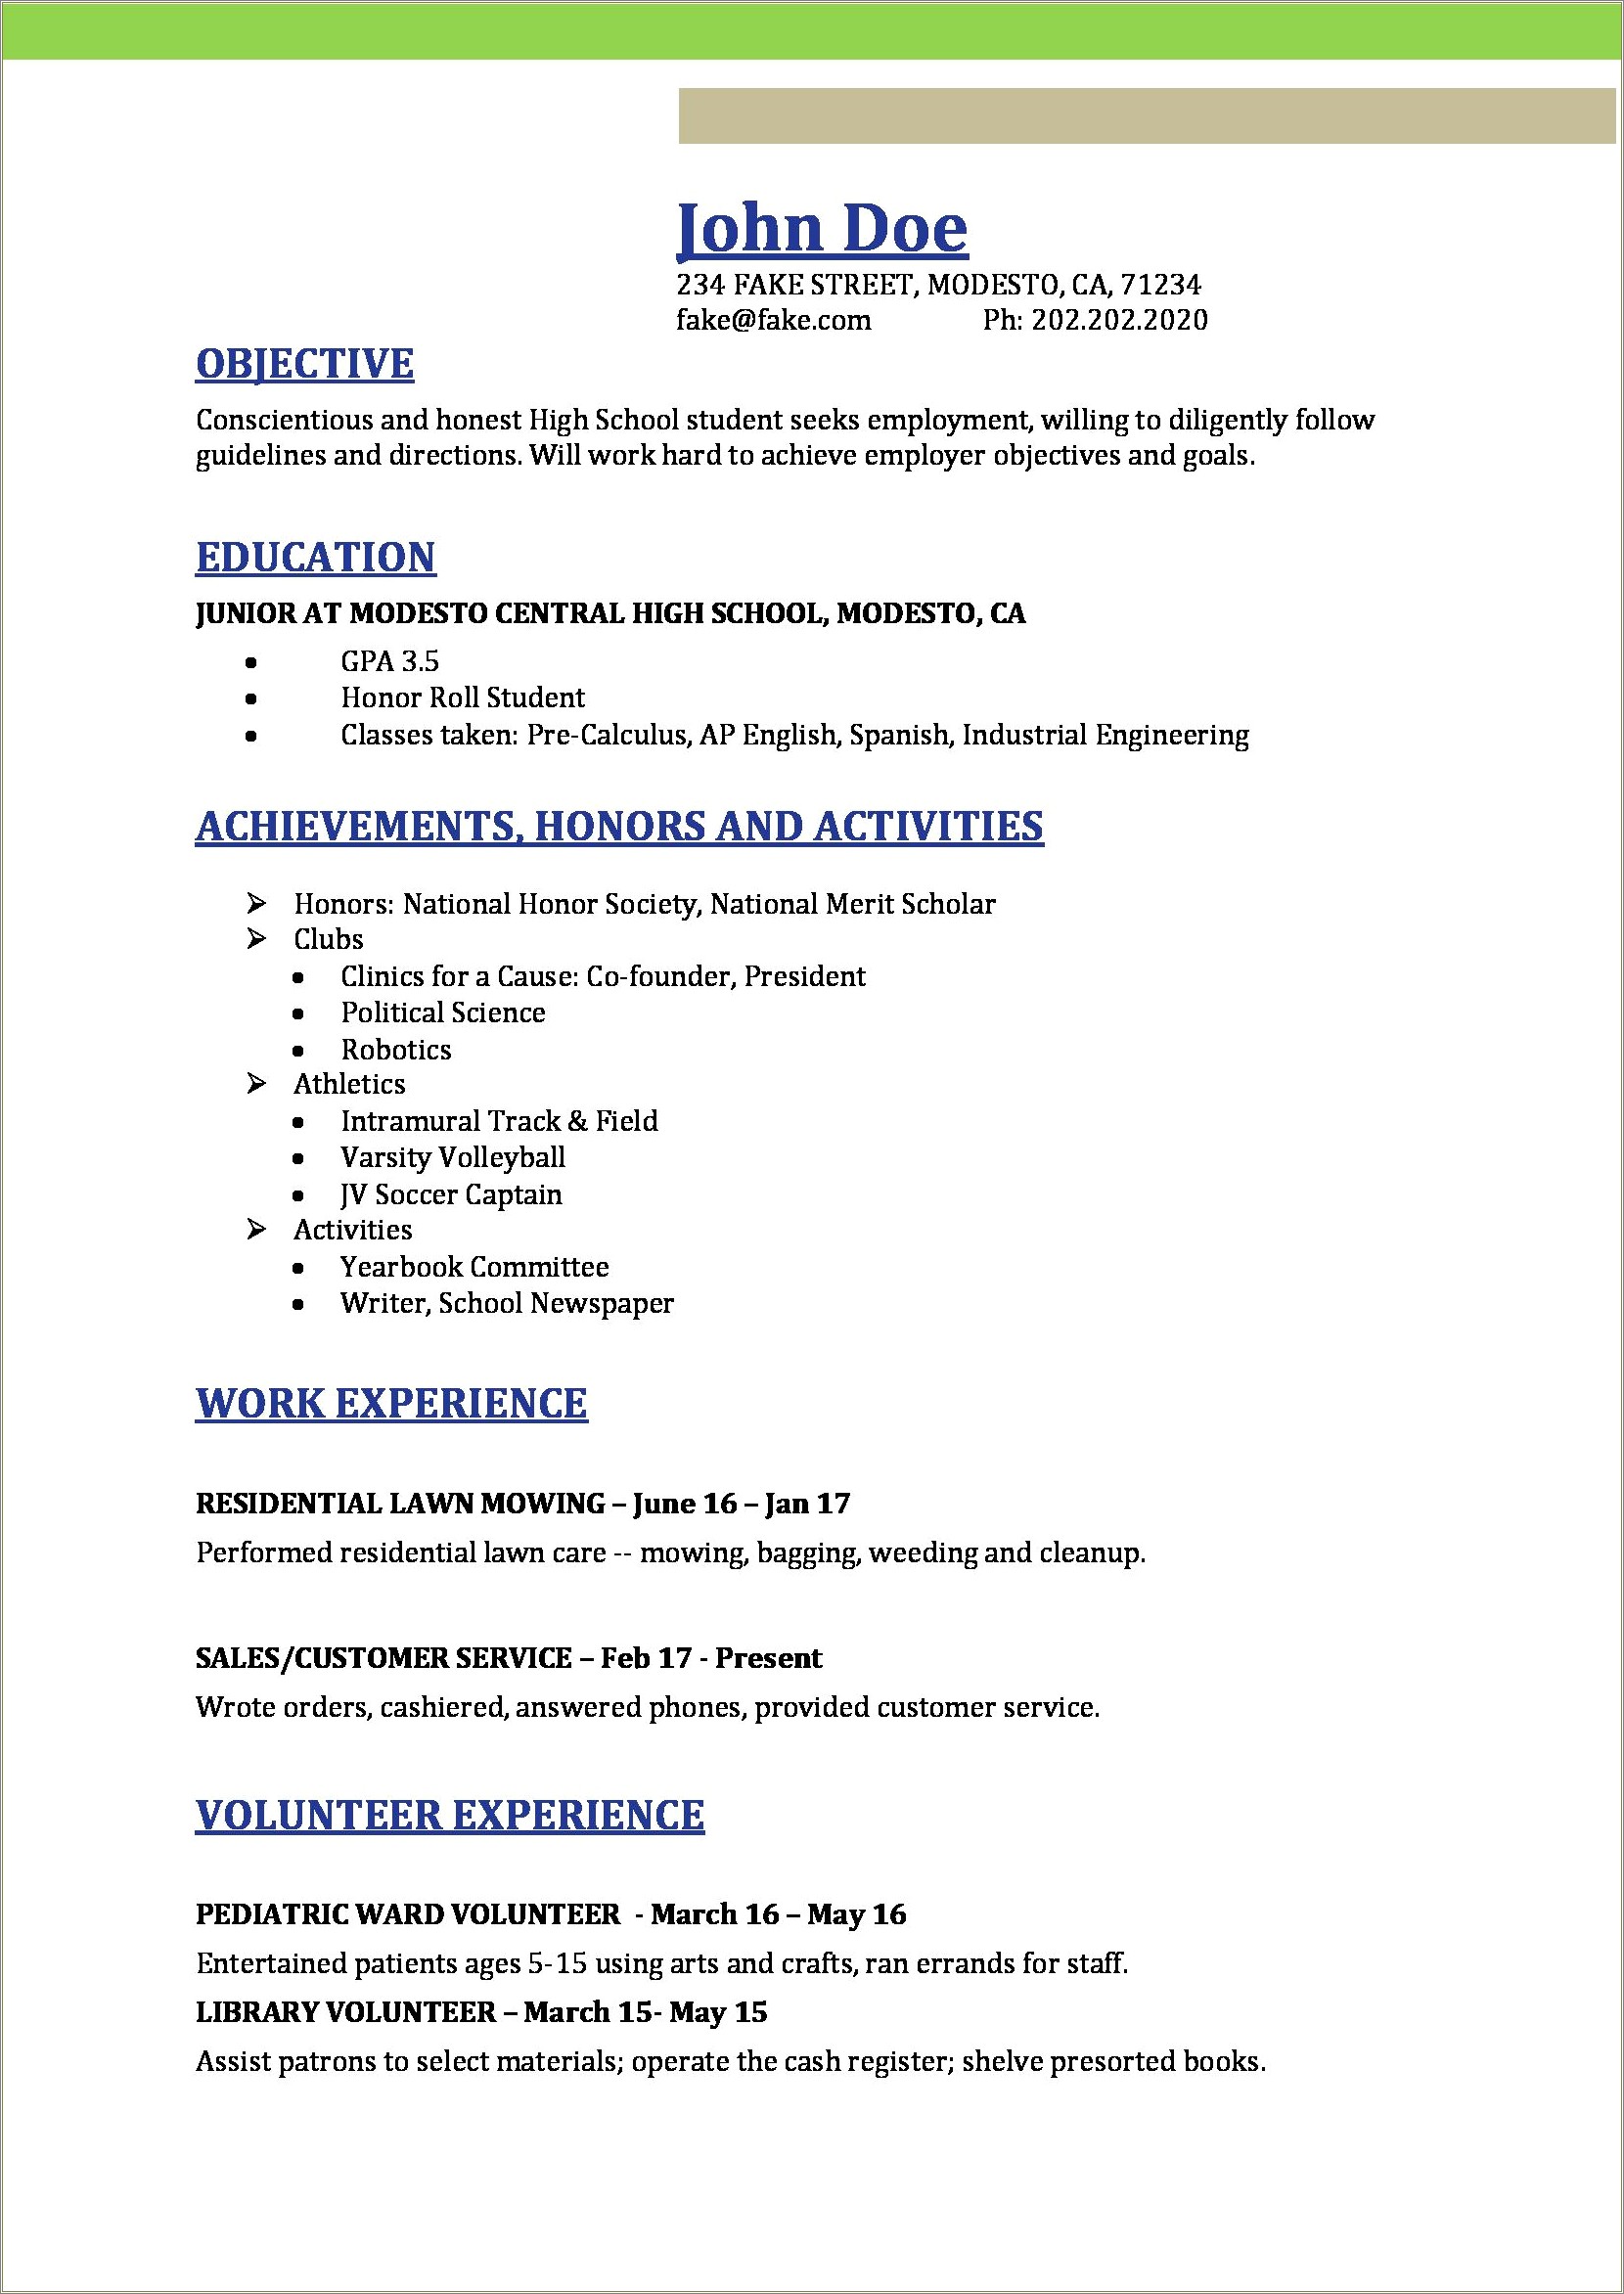 Background On Resume For High School Student Athlete